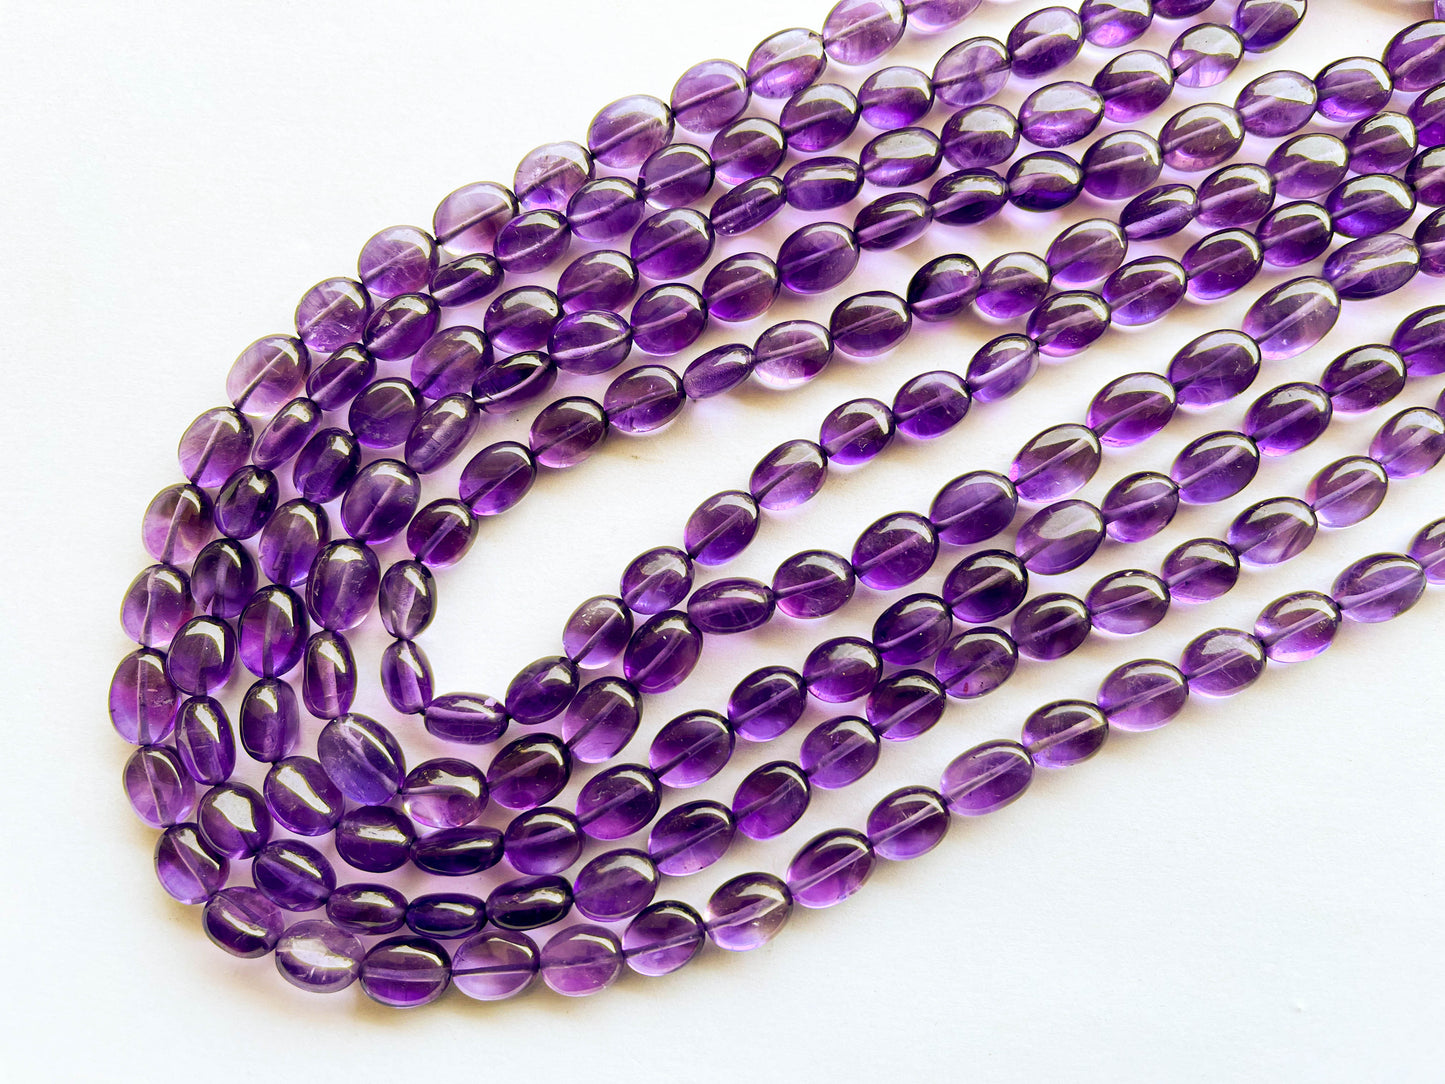 Amethyst Oval Shape Smooth Beads Beadsforyourjewelry